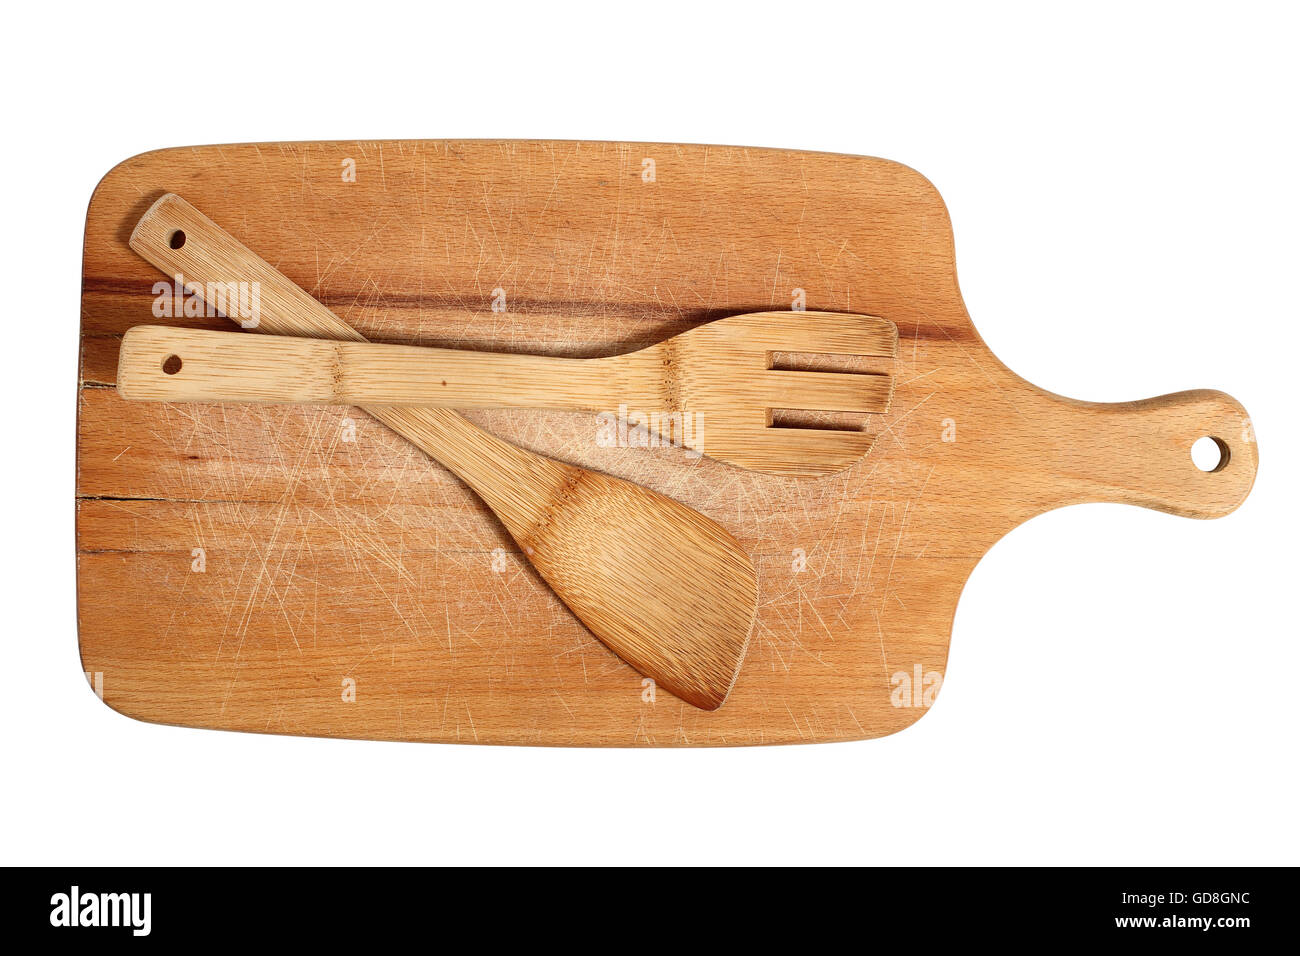 Wooden cutting board with spatula. Isolated with clipping path. Stock Photo